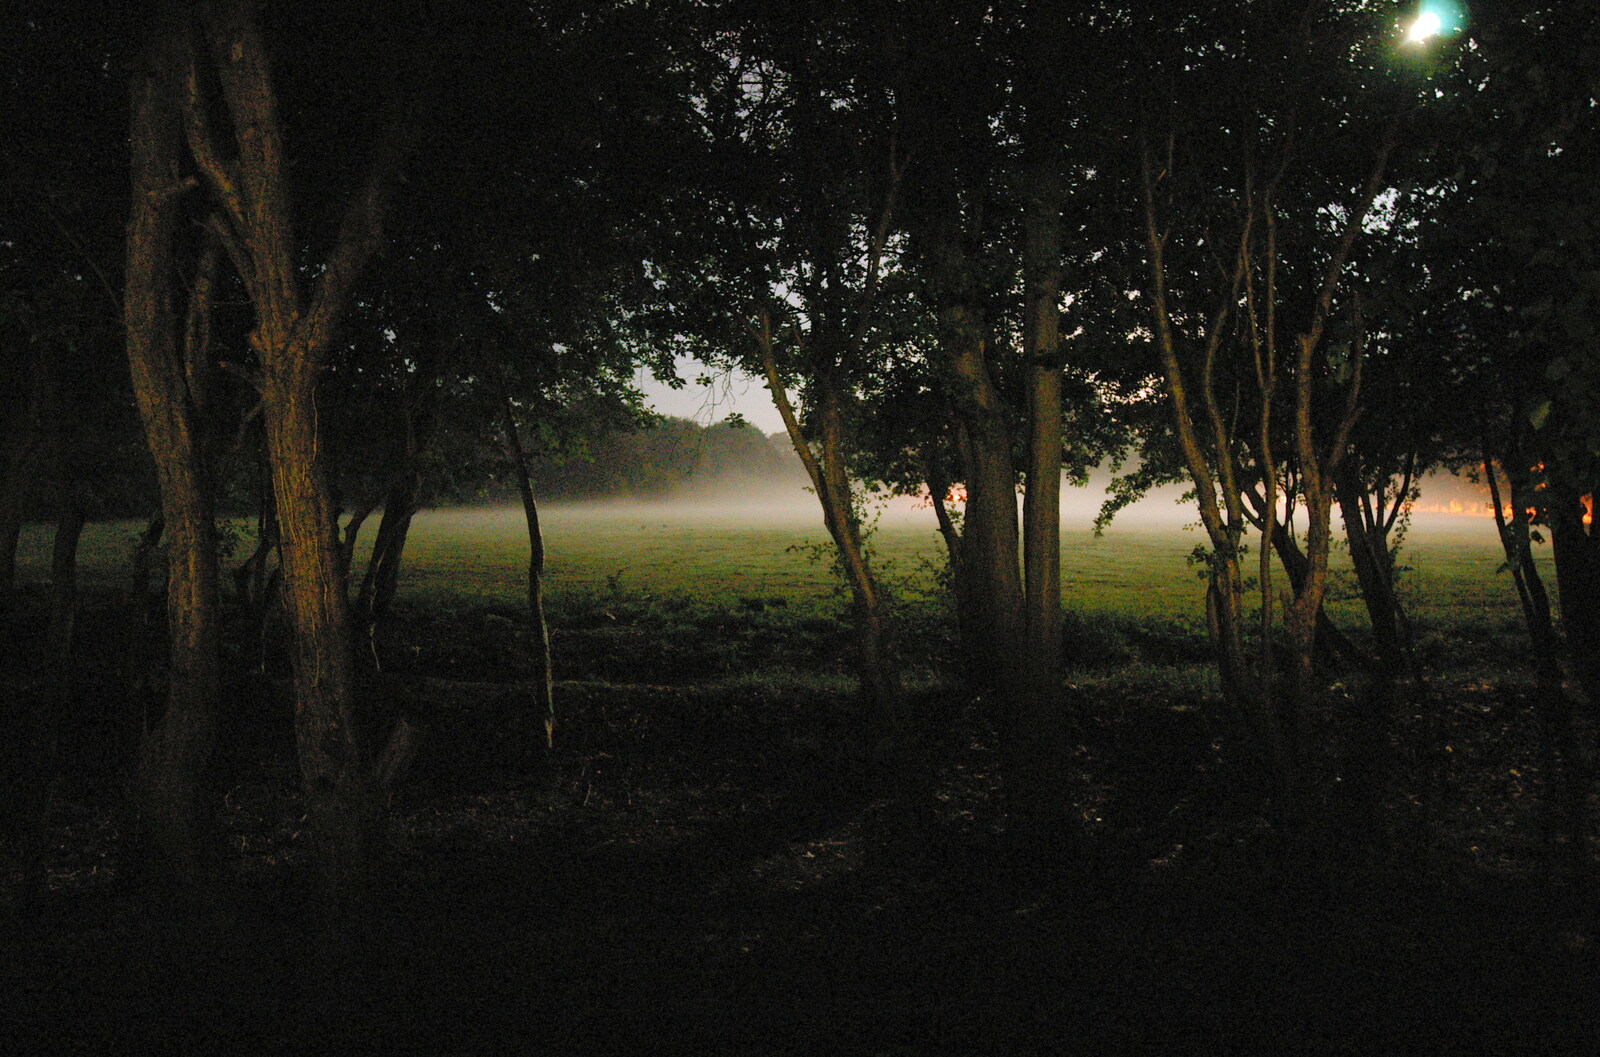 There's a moon-lit mist in Oaksmere's field from Life on the Neonatal Ward, Dairy Farm and Thrandeston Chapel, Suffolk - 26th August 2005